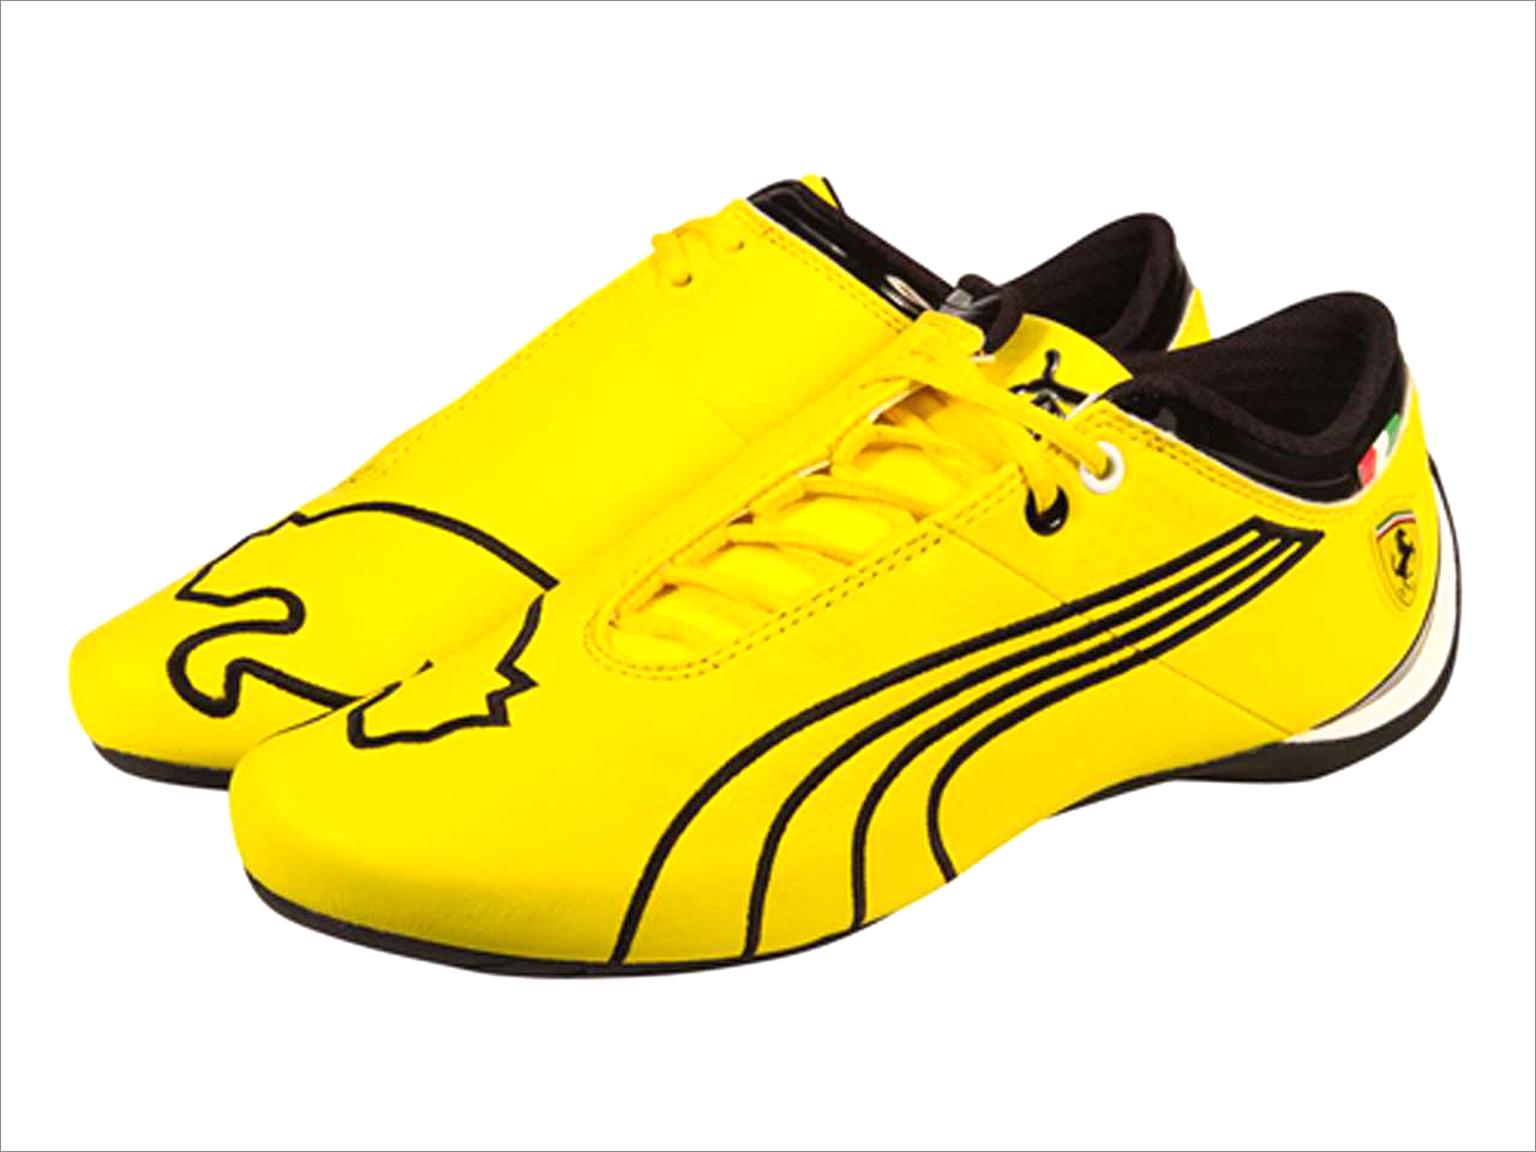 Puma Ferrari Shoes Yellow for sale in UK View 11 ads